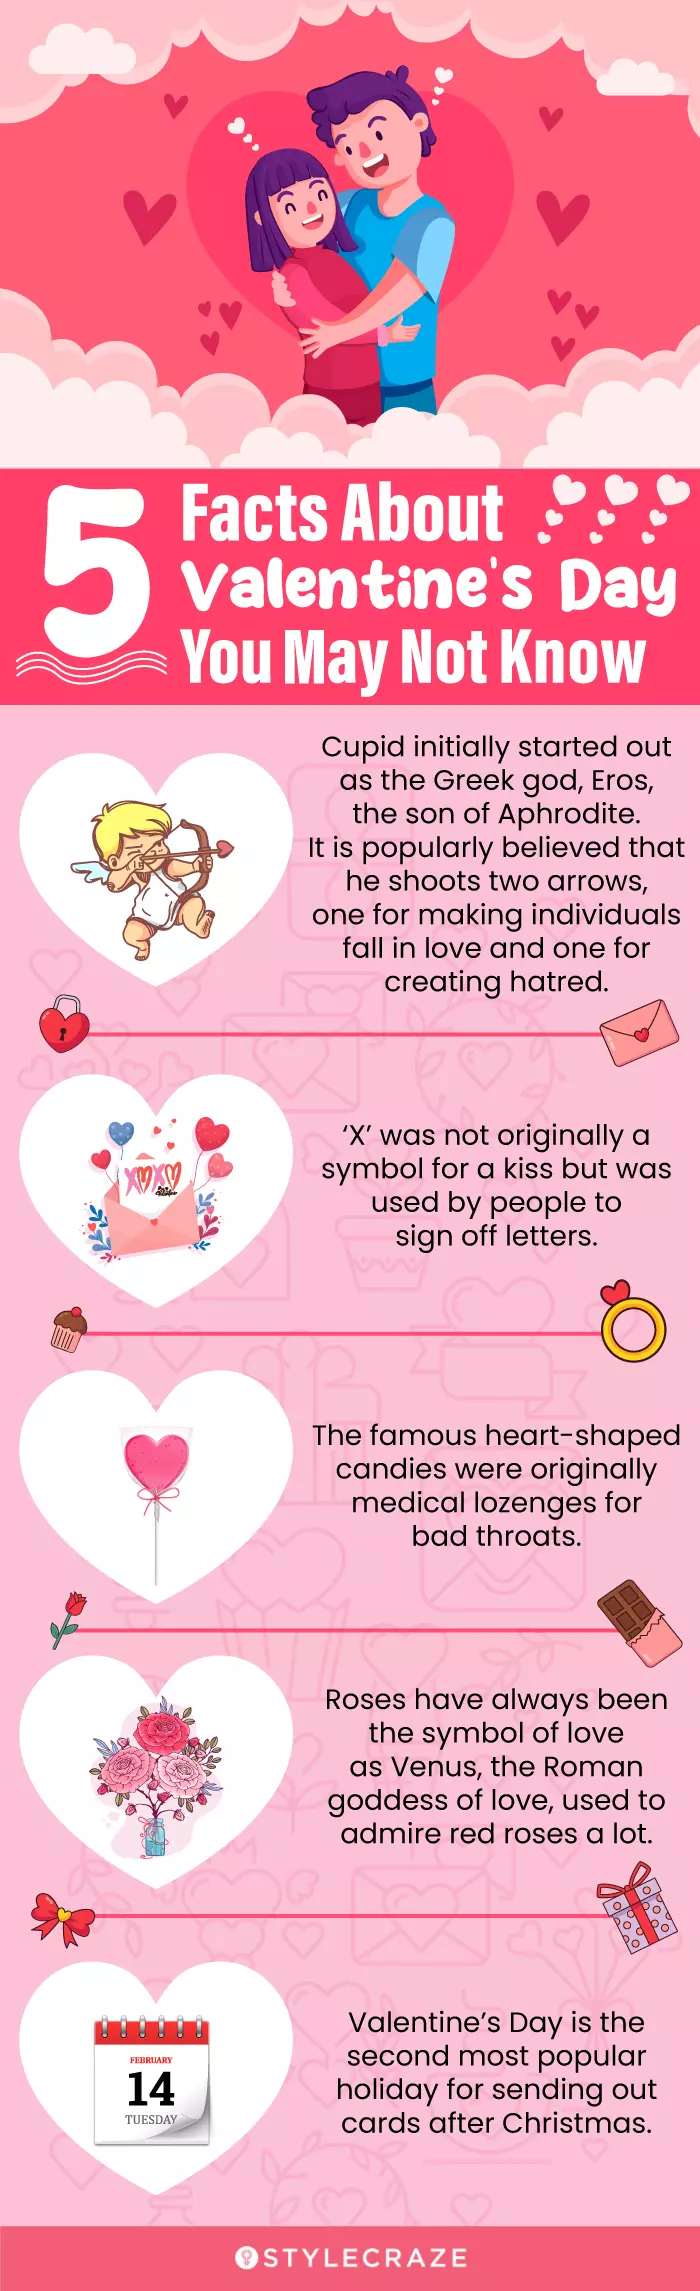 5 facts about valentine’s day you may not know (infographic)